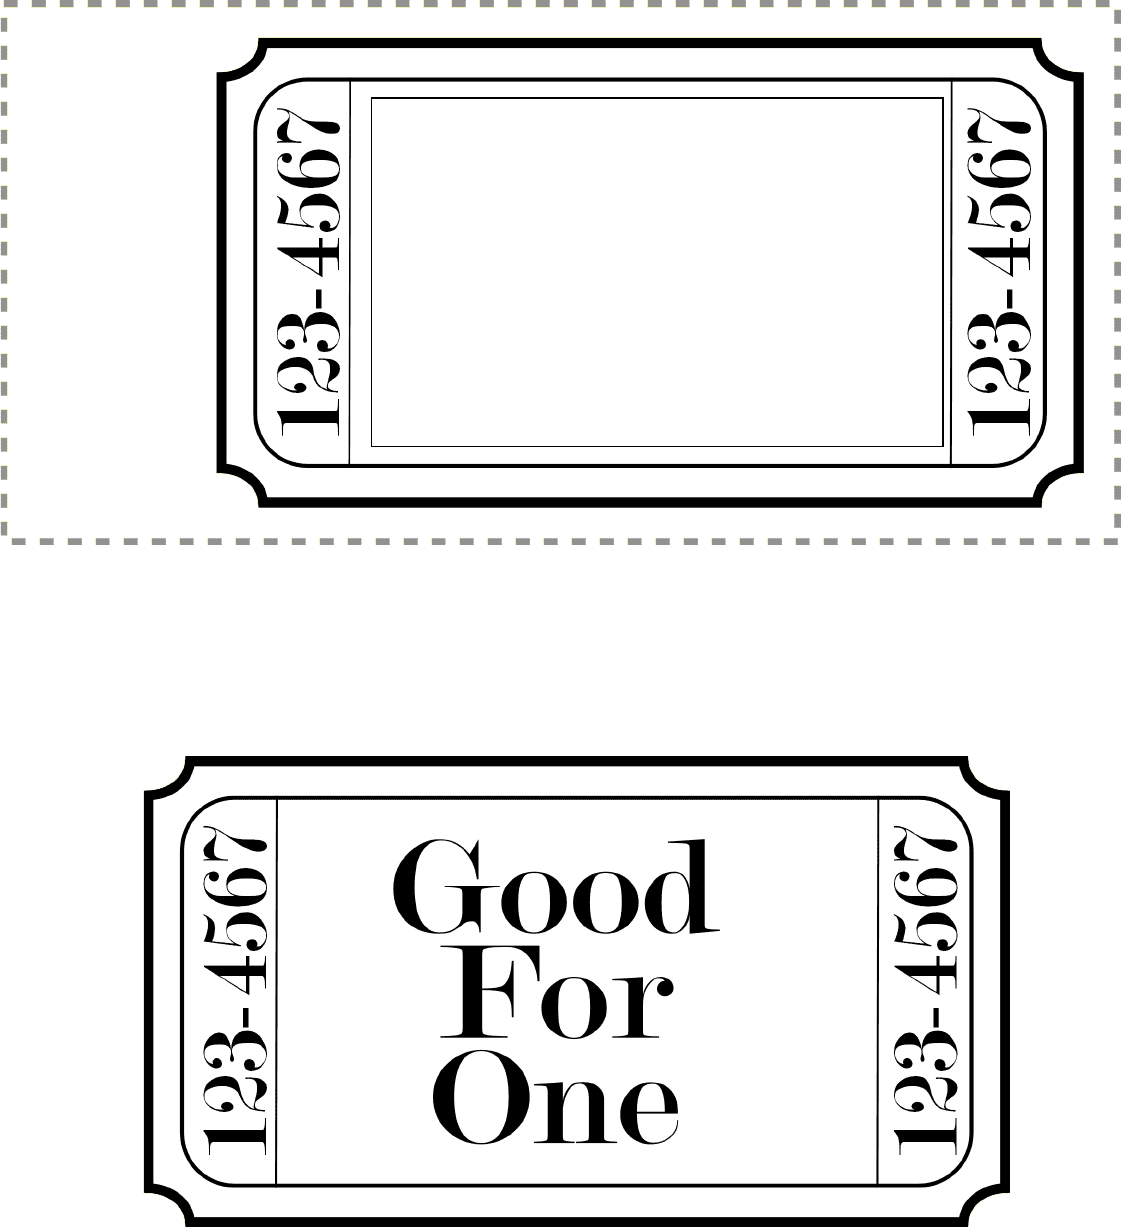 one-meal-out-coupon-template-download-printable-pdf-templateroller